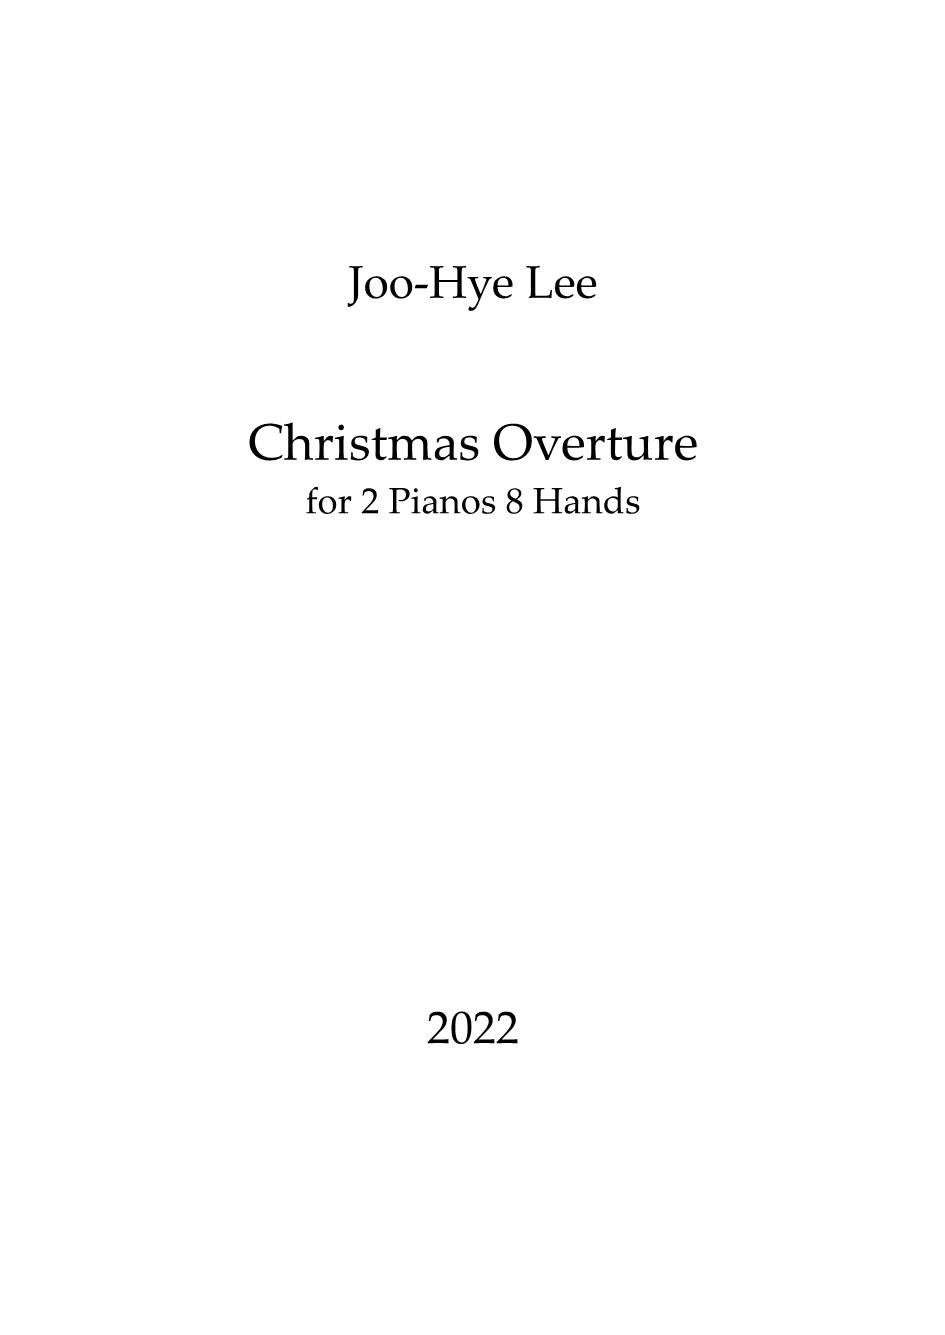 Christmas Overture for 2 pianos 8 hands